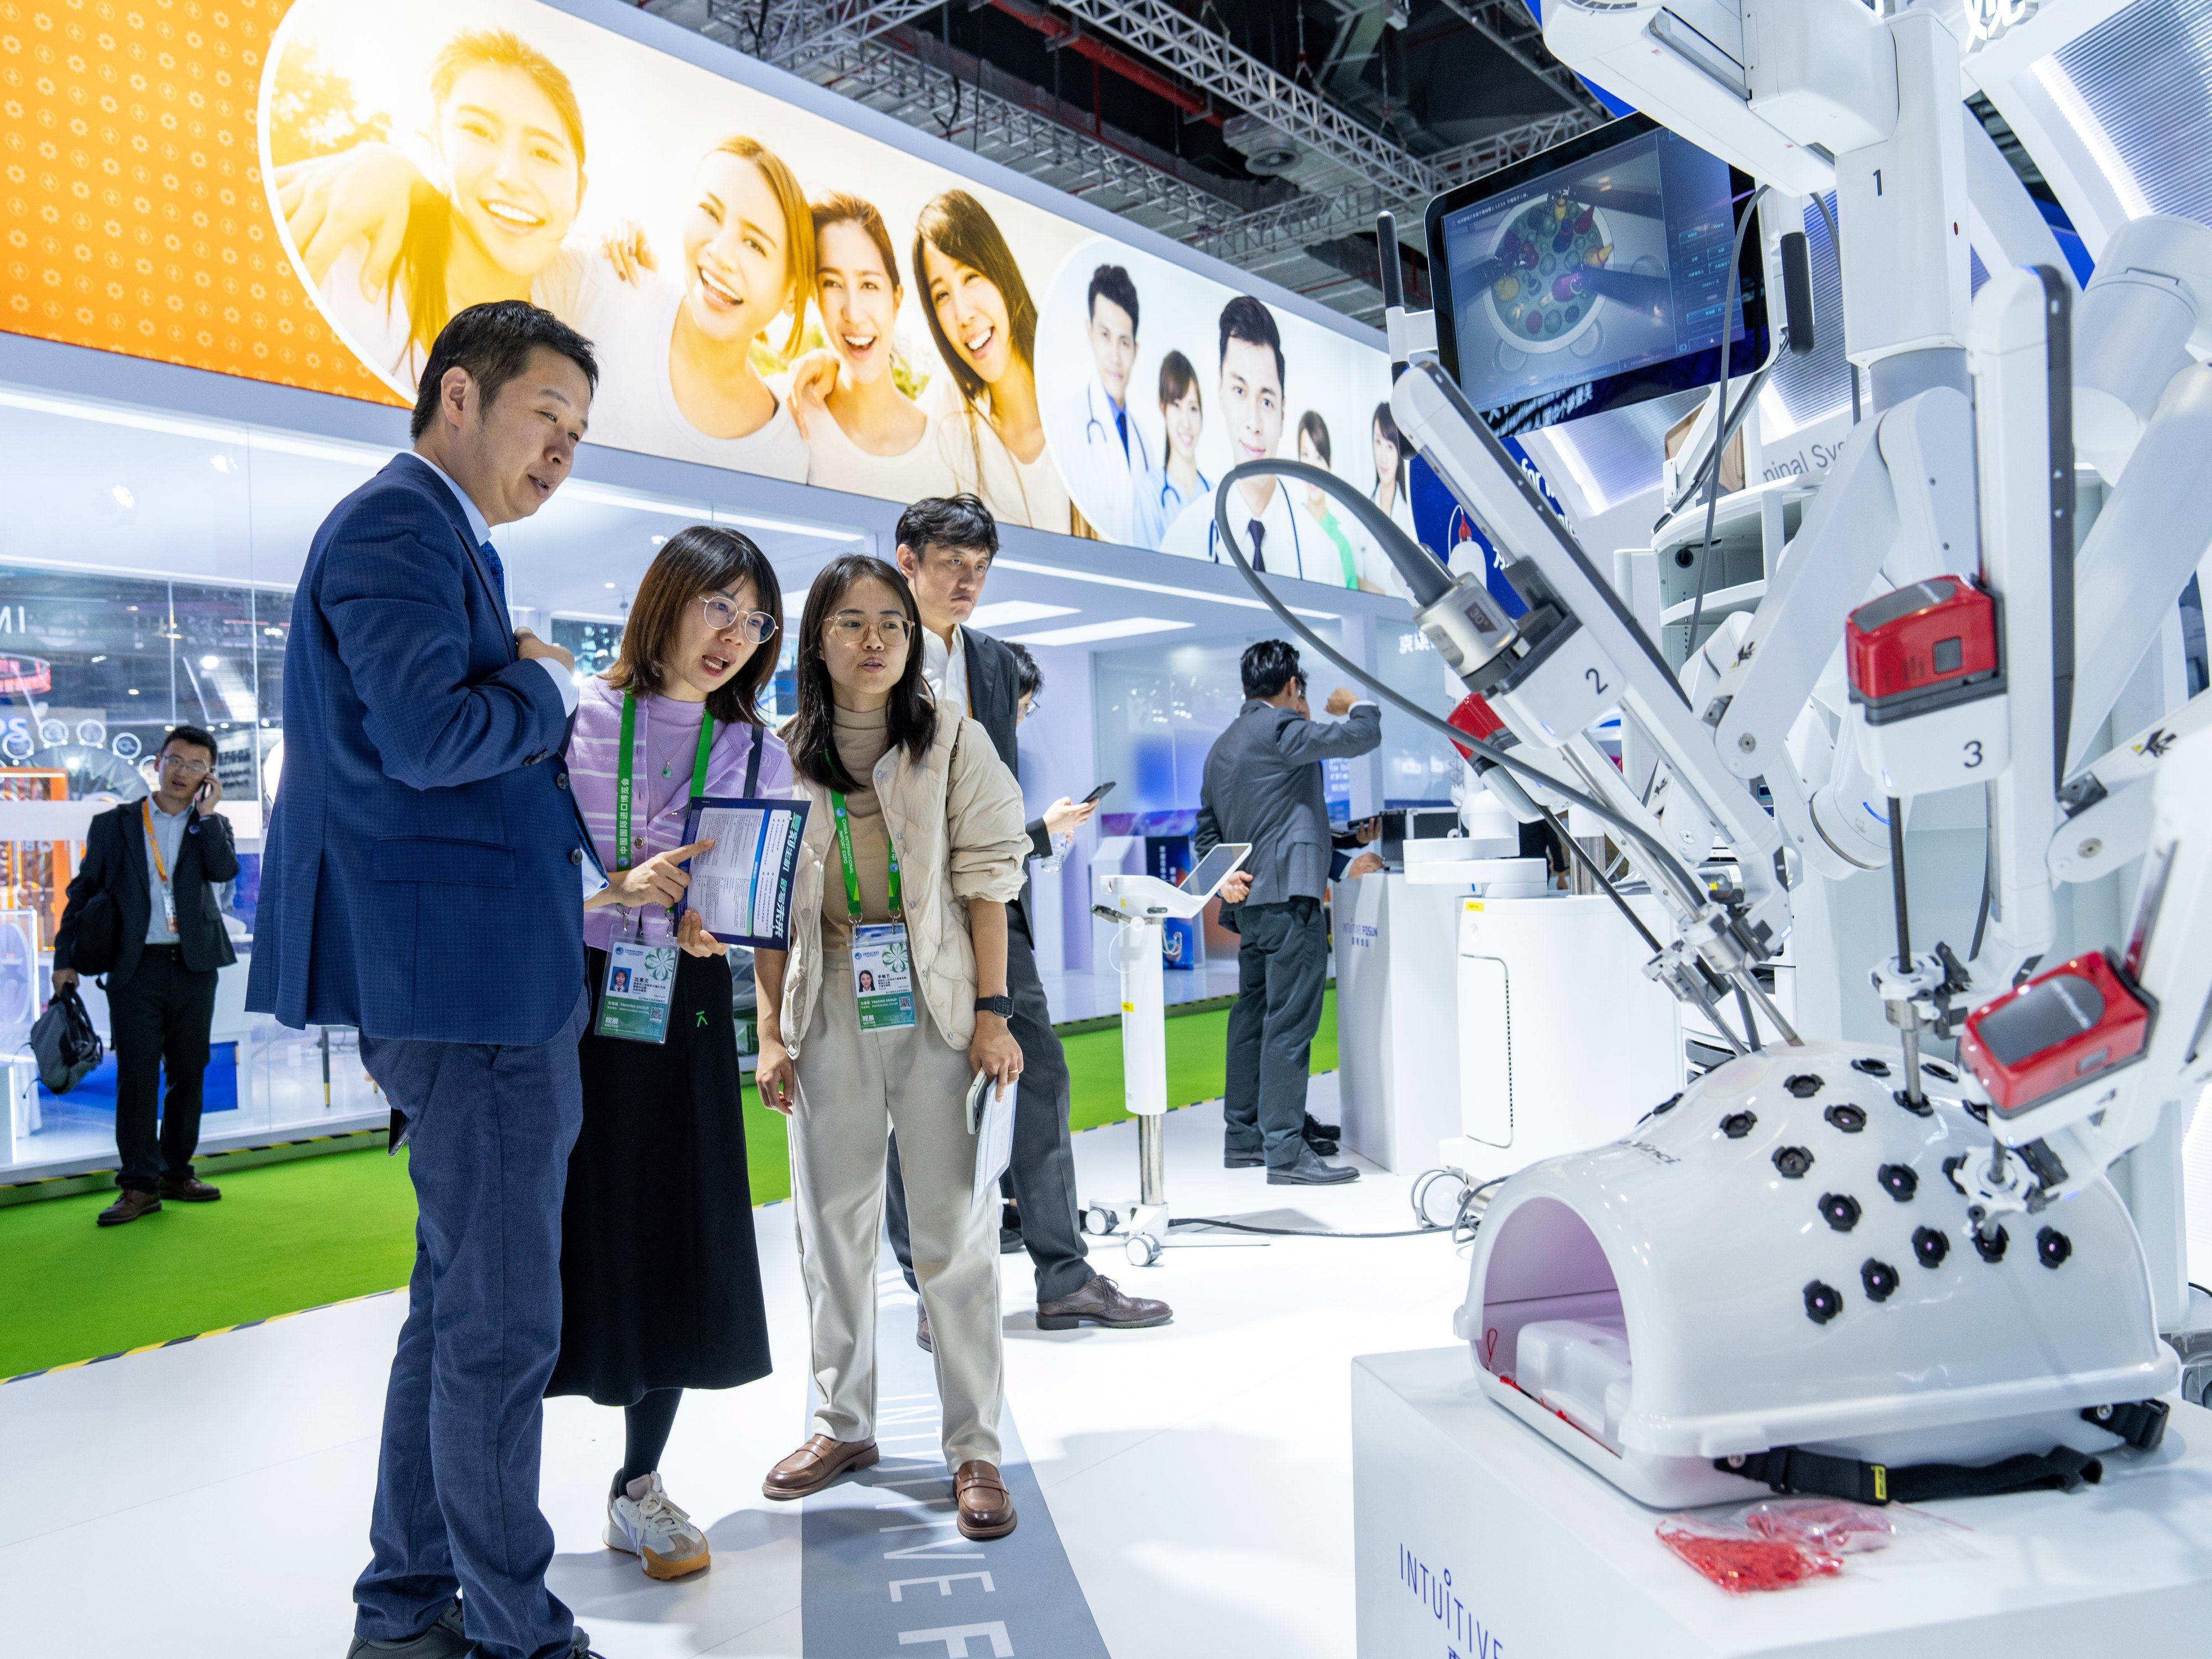 Visitors looking at Fosun Pharma’s locall-produced Da Vinci surgical system in the Medical Equipment and Healthcare Exhibition Area during the CIIE 2023 Expo in Shanghai on November 6. Shanghai, China. Photo: Future Publishing via Getty Images